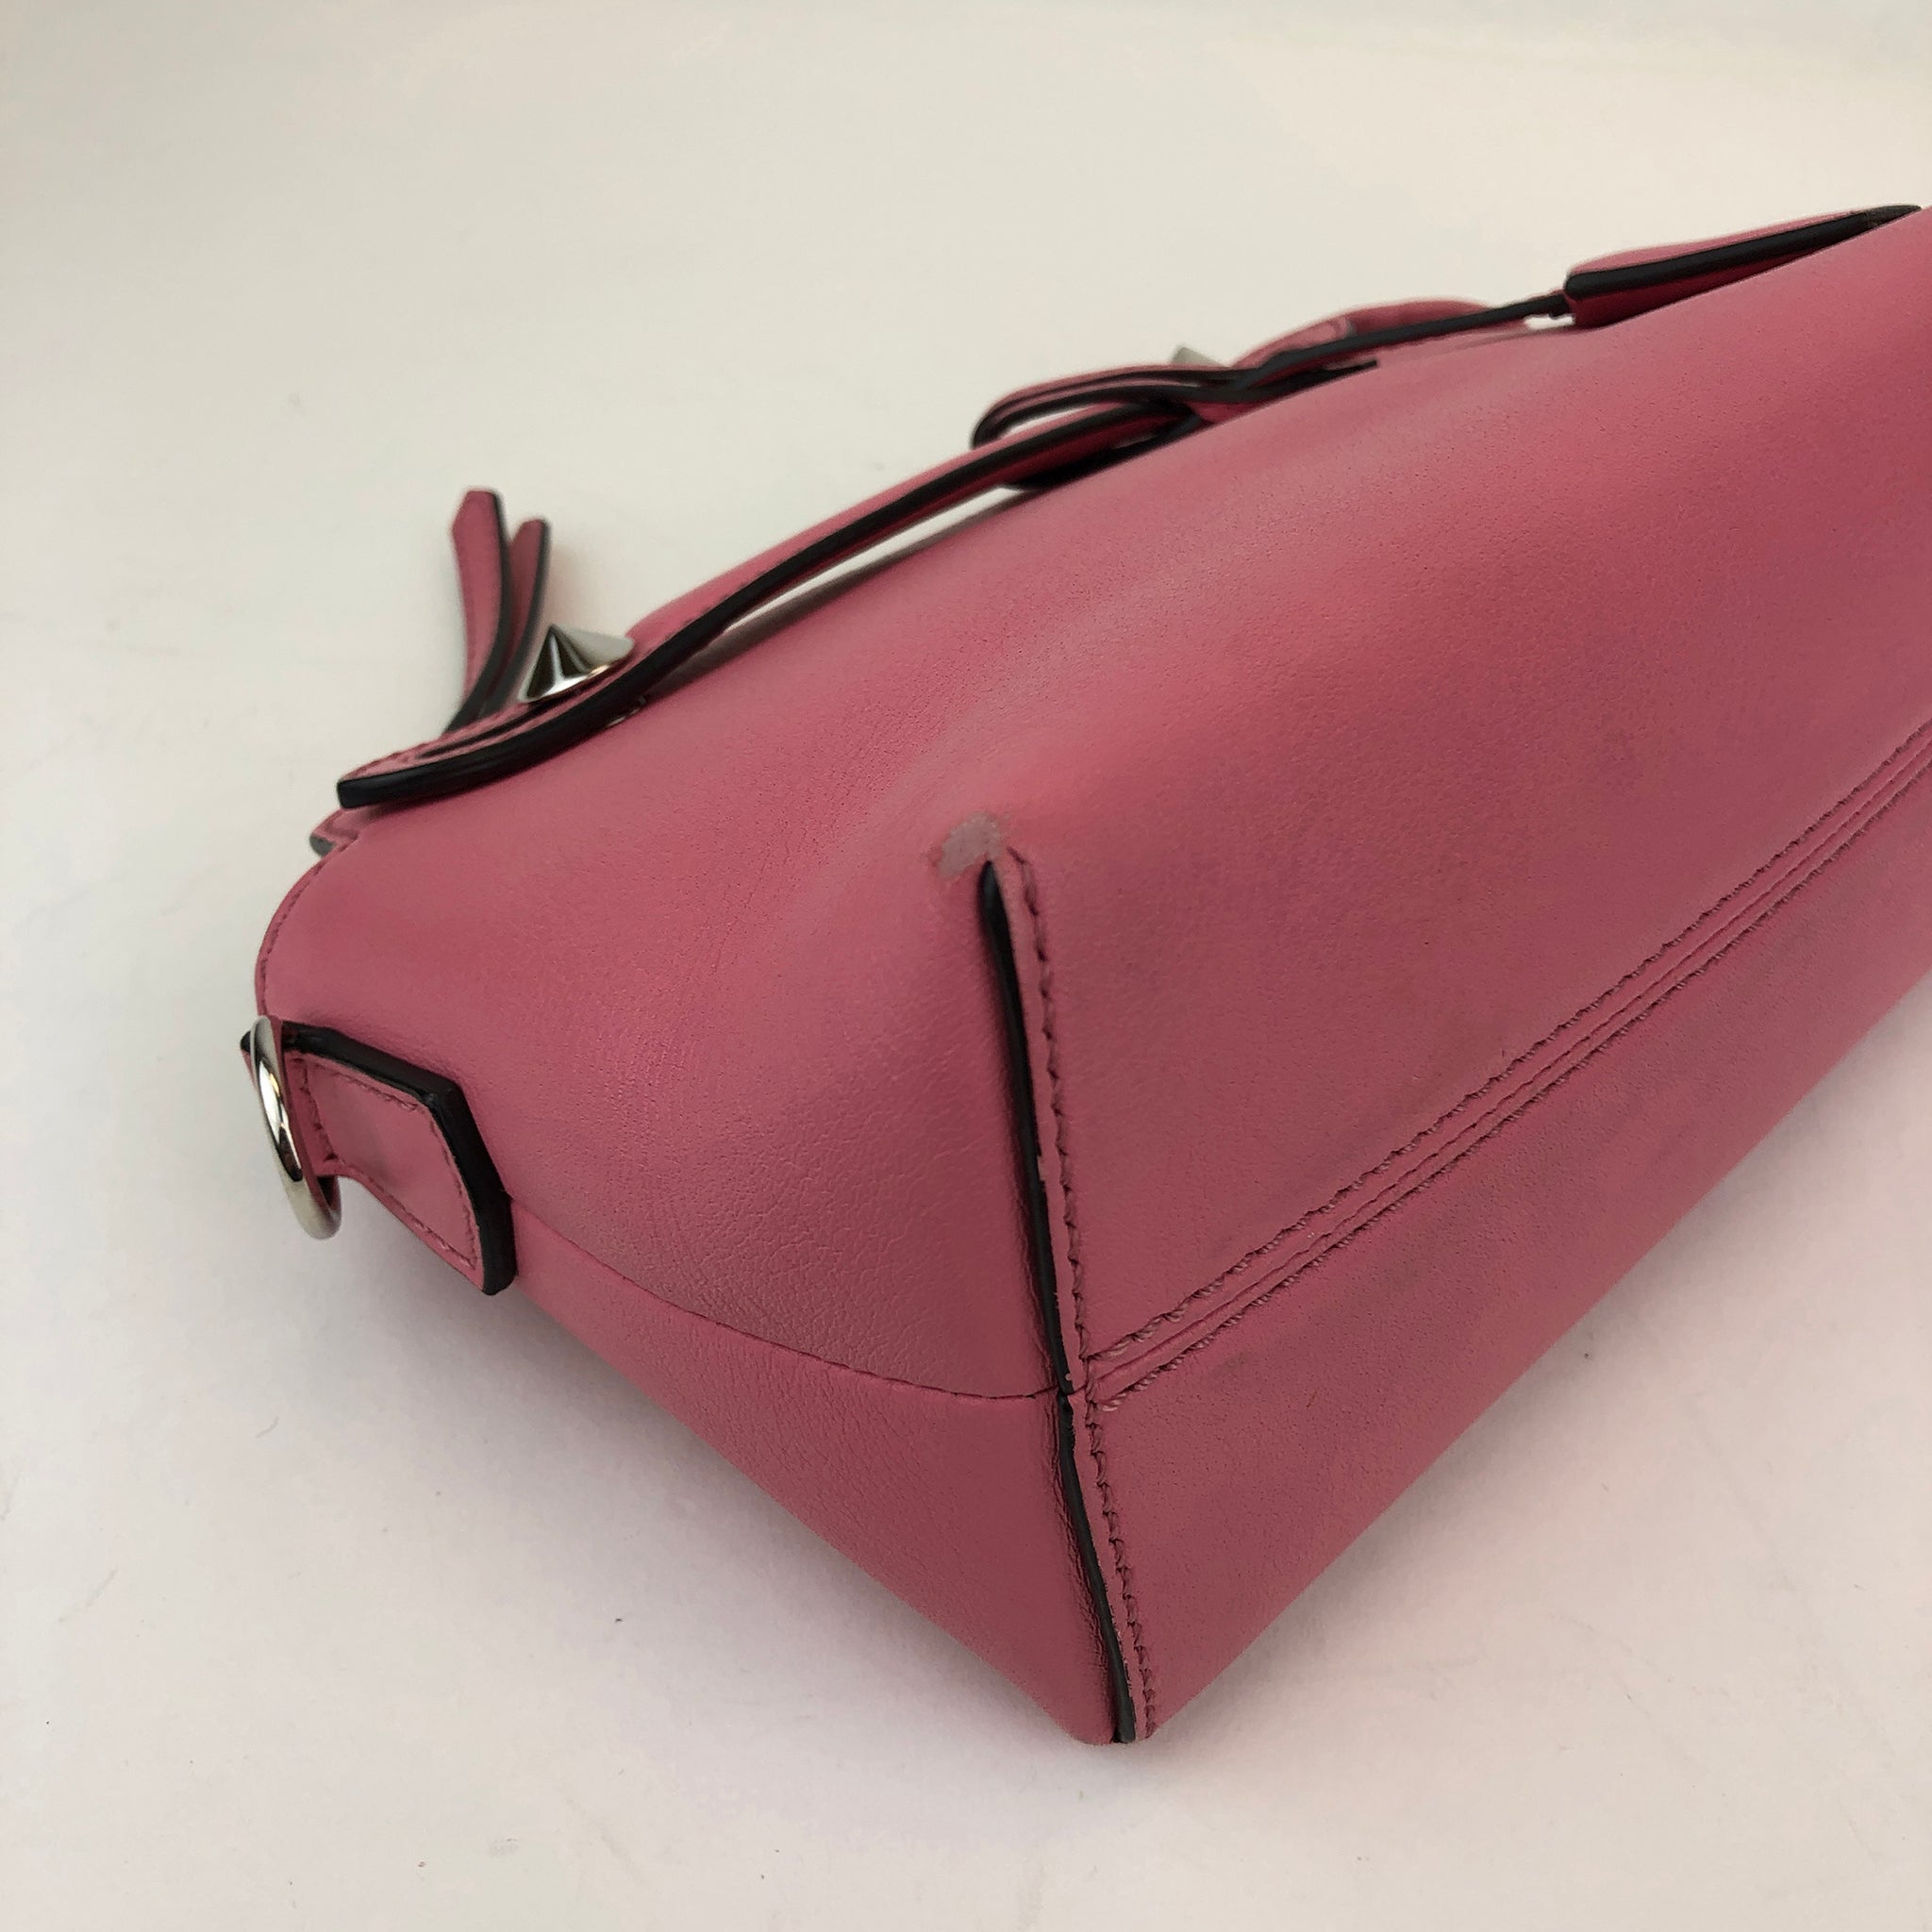 By The Way Pink Leather Bag (Pre-Owned)